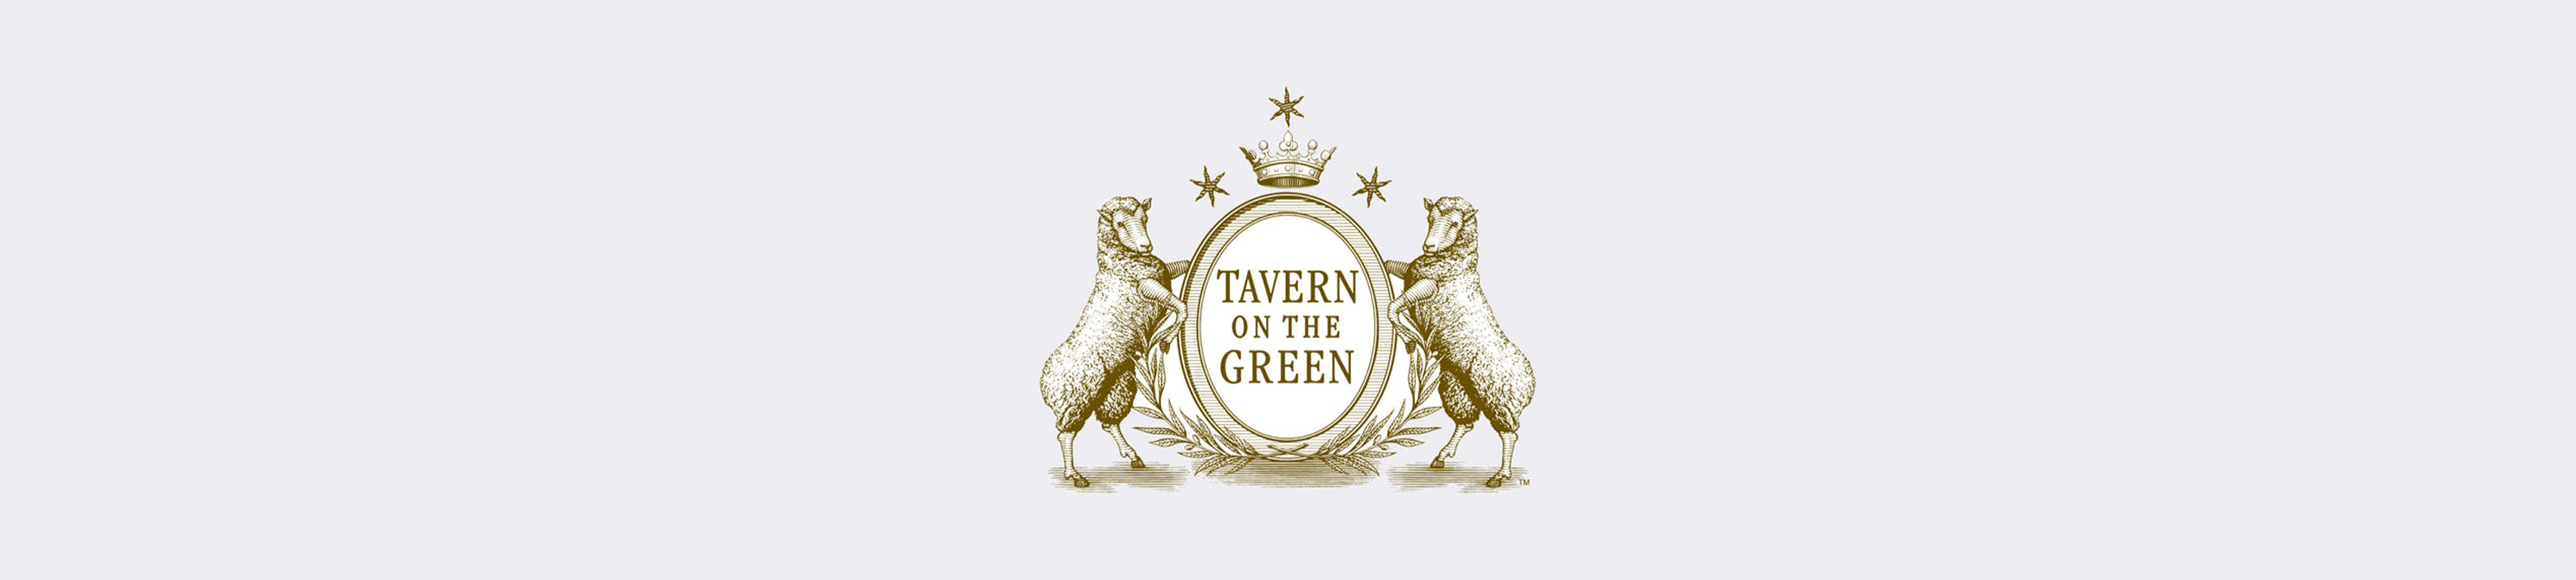 Tavern on the Green 1